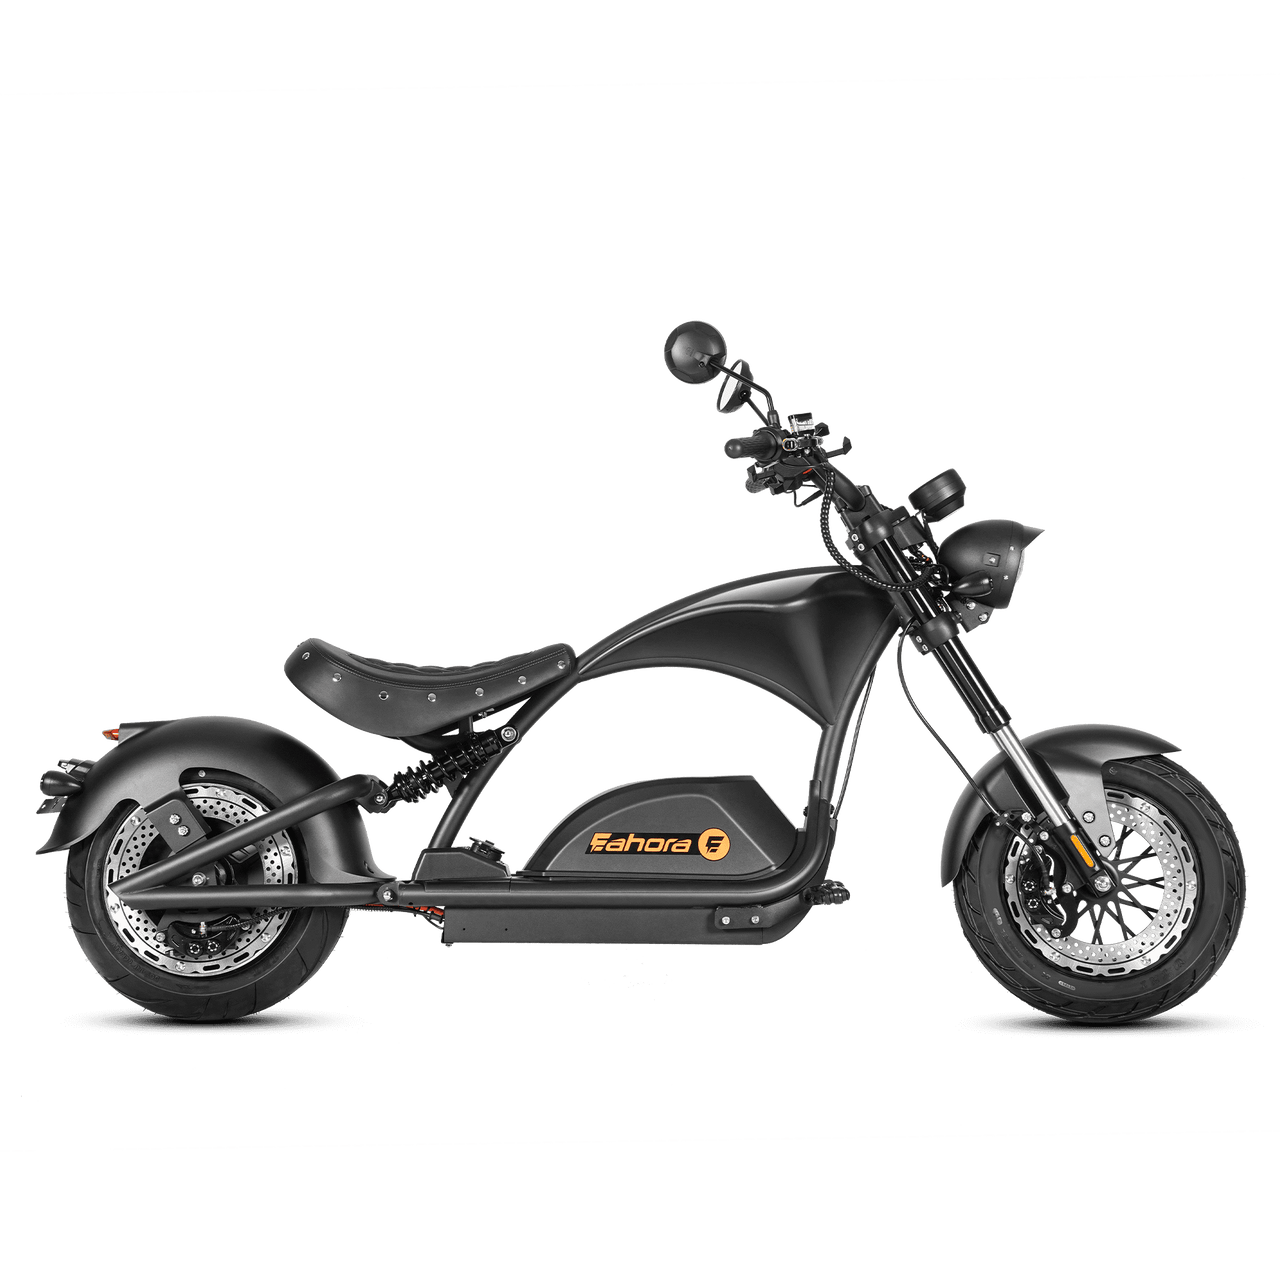 This Electric Chopper Will Leave You Flabbergasted